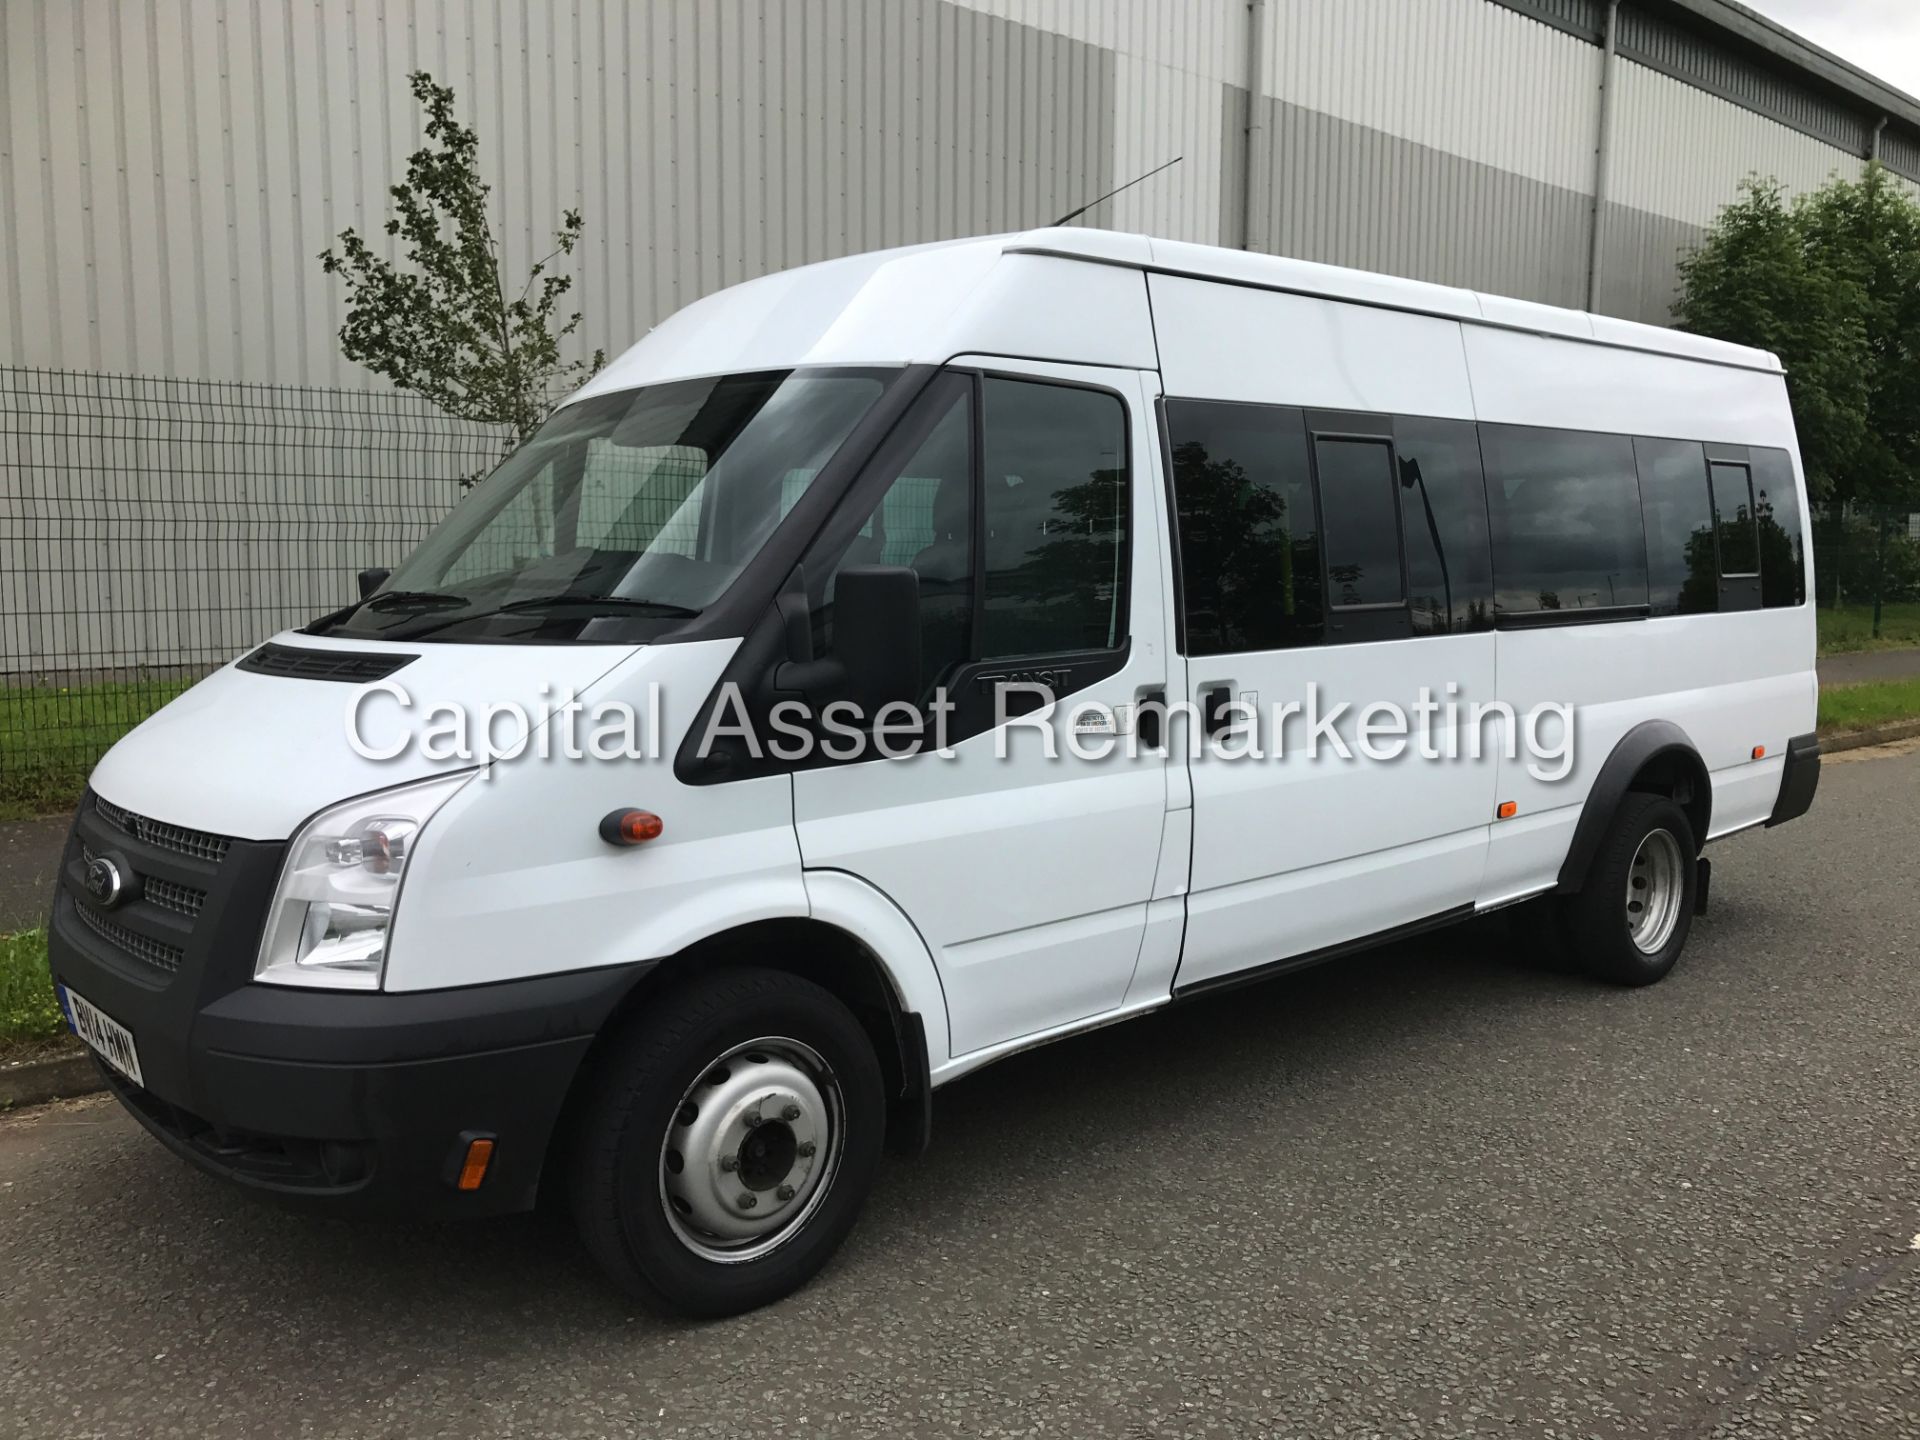 FORD TRANSIT 2.2TDCI (135) - 17 SEATER MINIBUS / COACH - 14 REG - LOW MILES - 1 OWNER - LWB - WOW!!! - Image 2 of 21